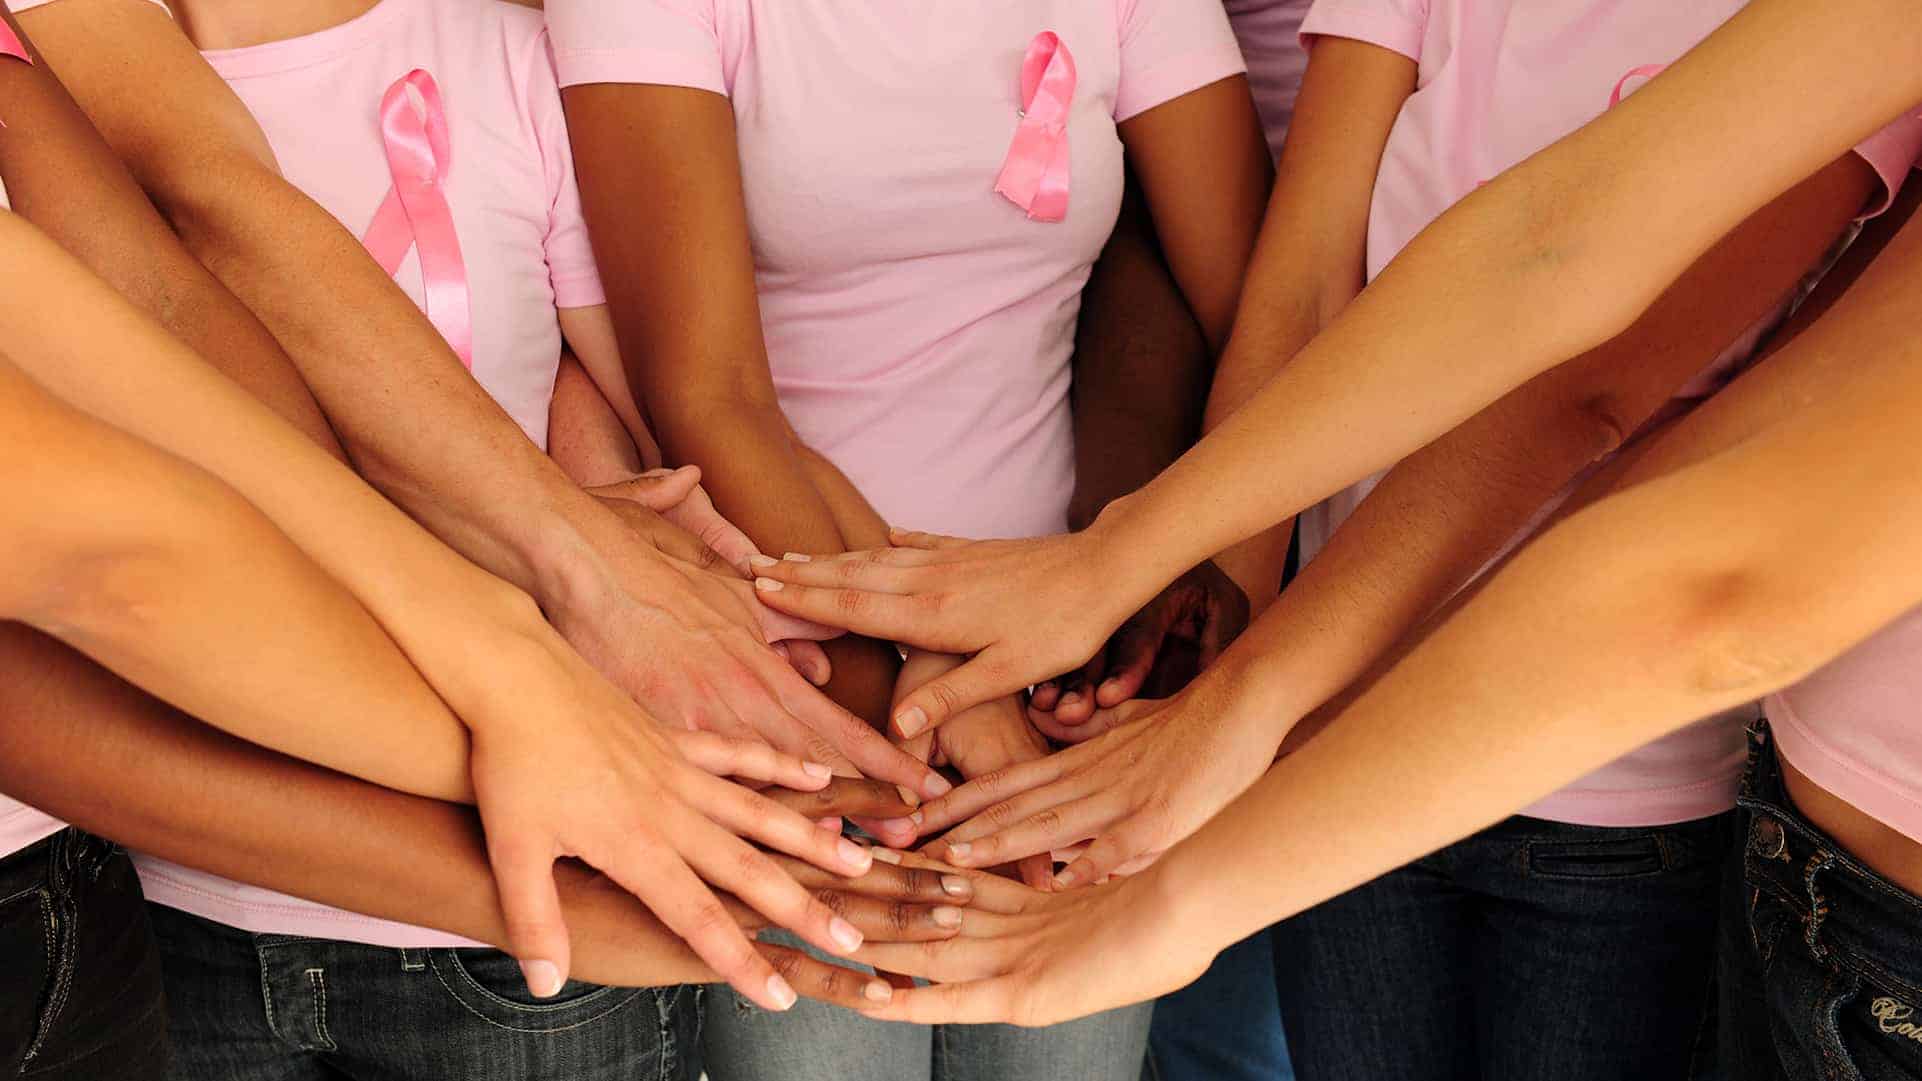 FFAM360 is “Making A Difference” and Joining the Fight Against Breast Cancer